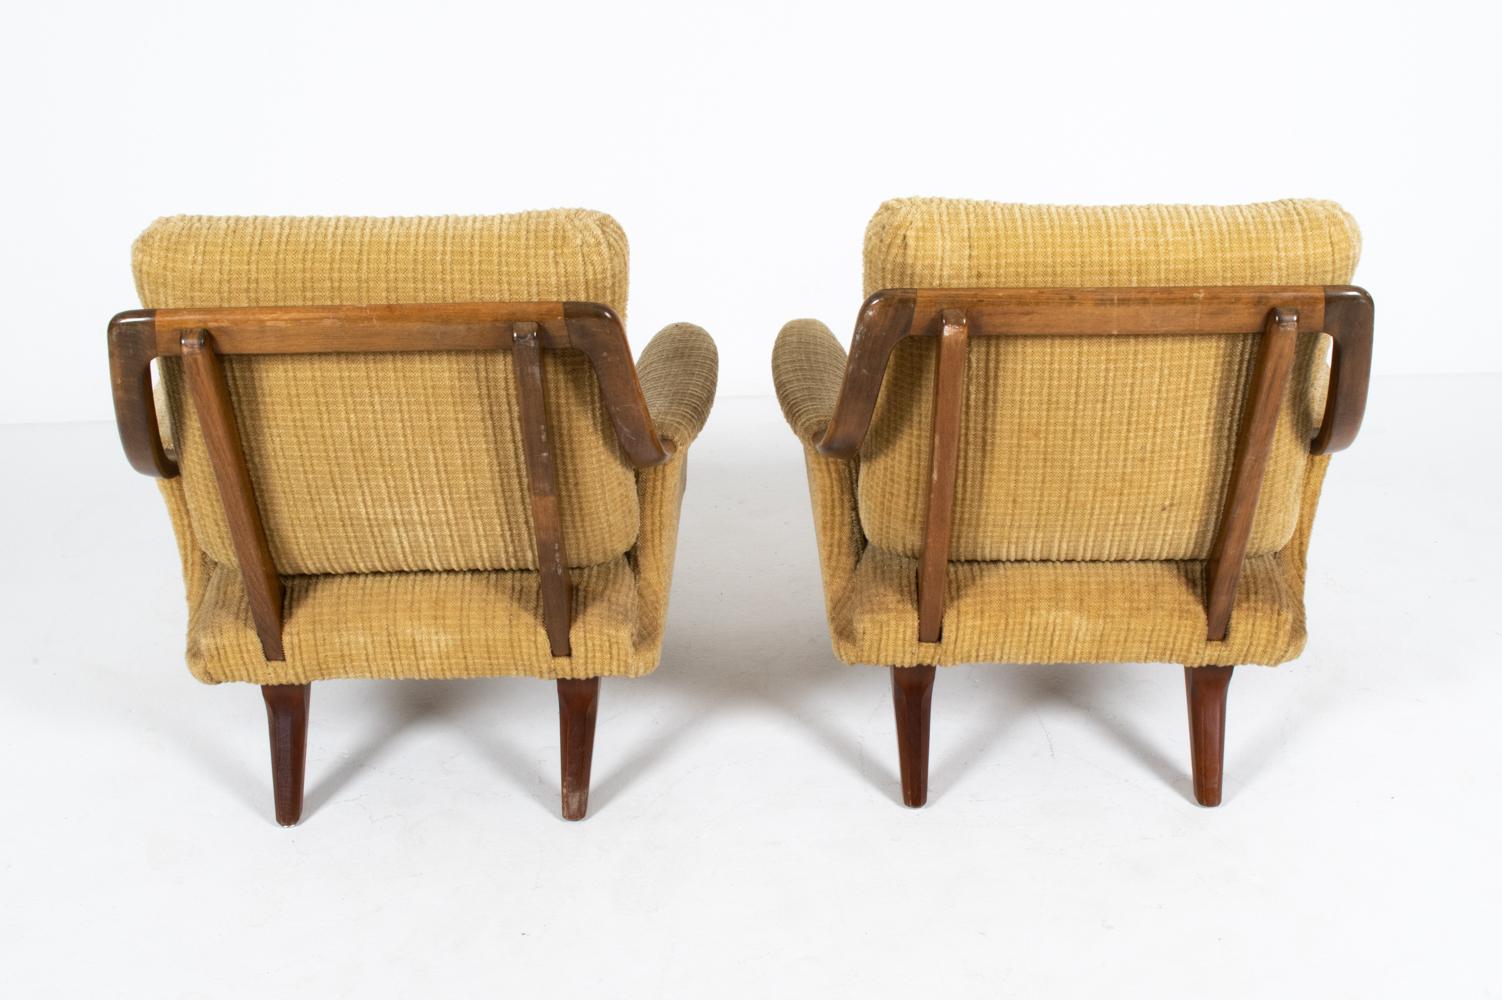 Pair of Scandinavian Mid-Century Lounge Chairs, c. 1950's For Sale 3